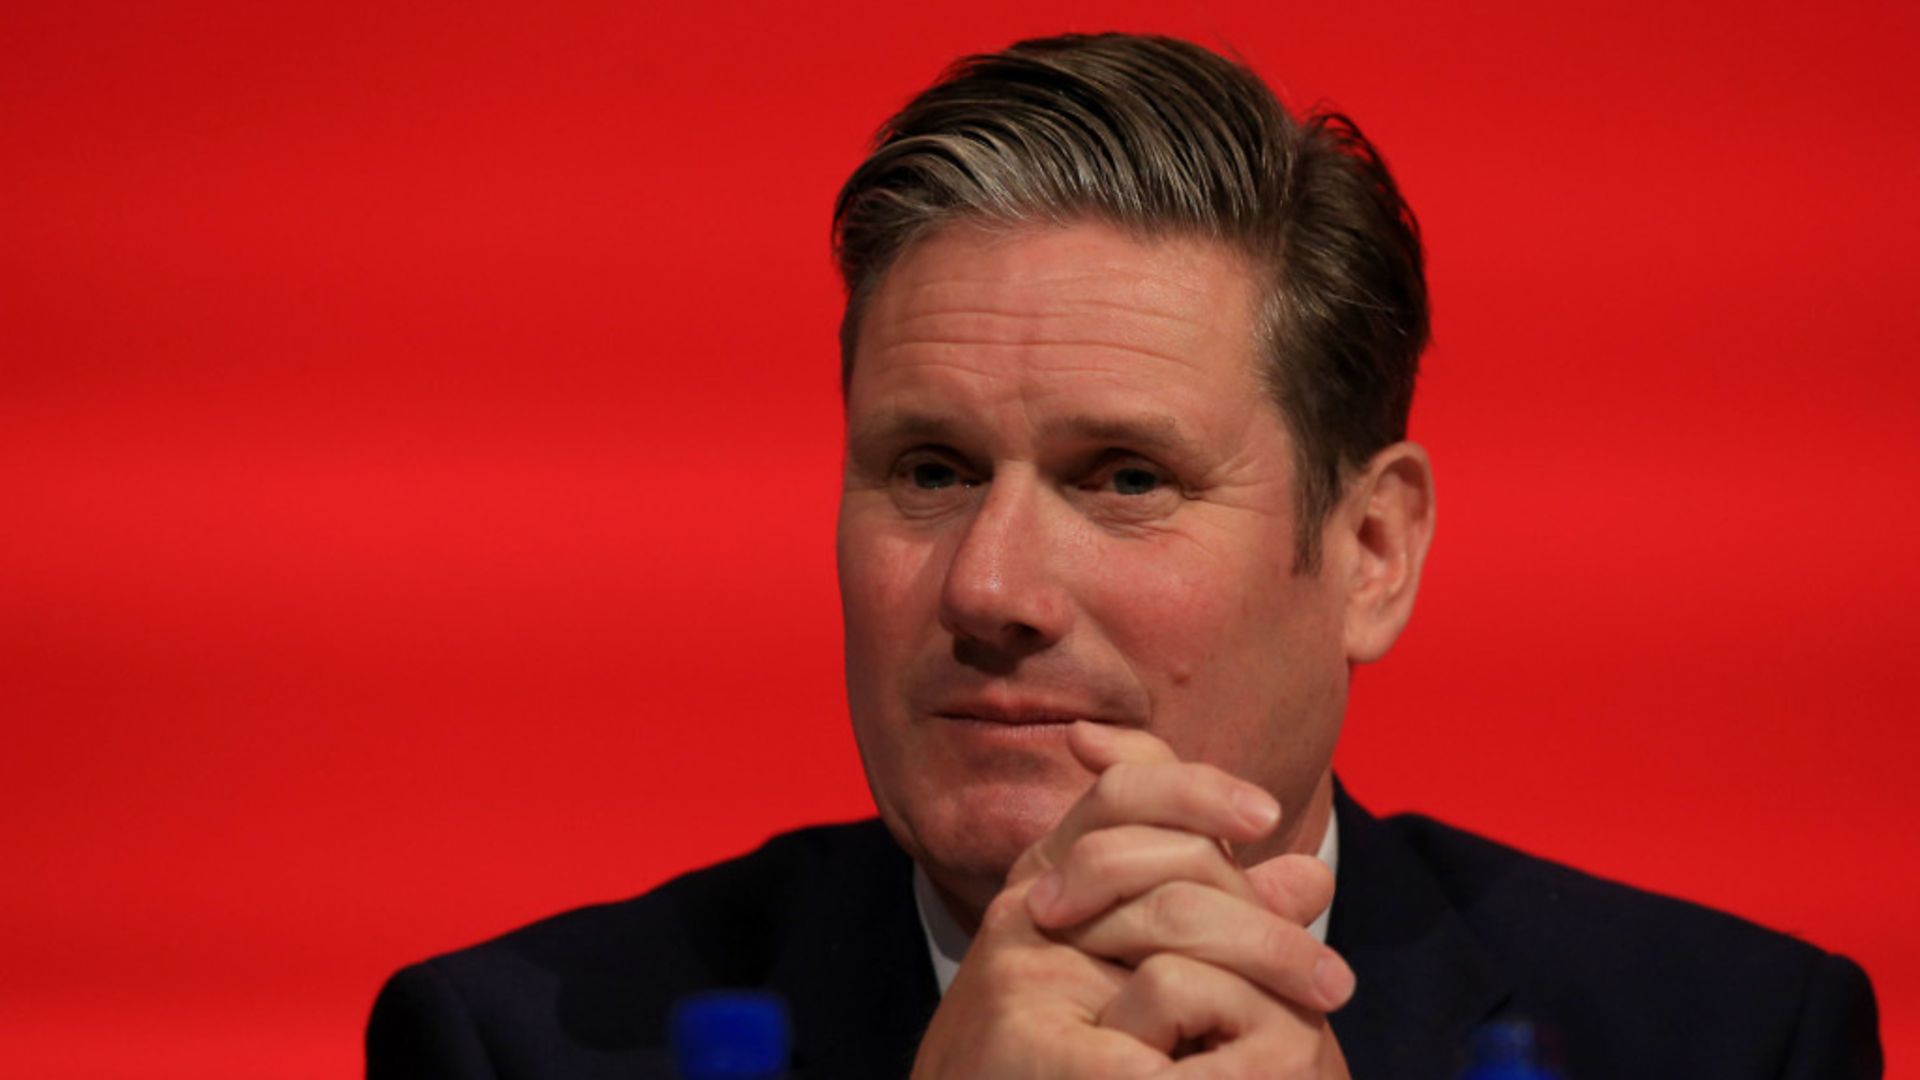 Sir Keir Starmer - Credit: PA Wire/PA Images